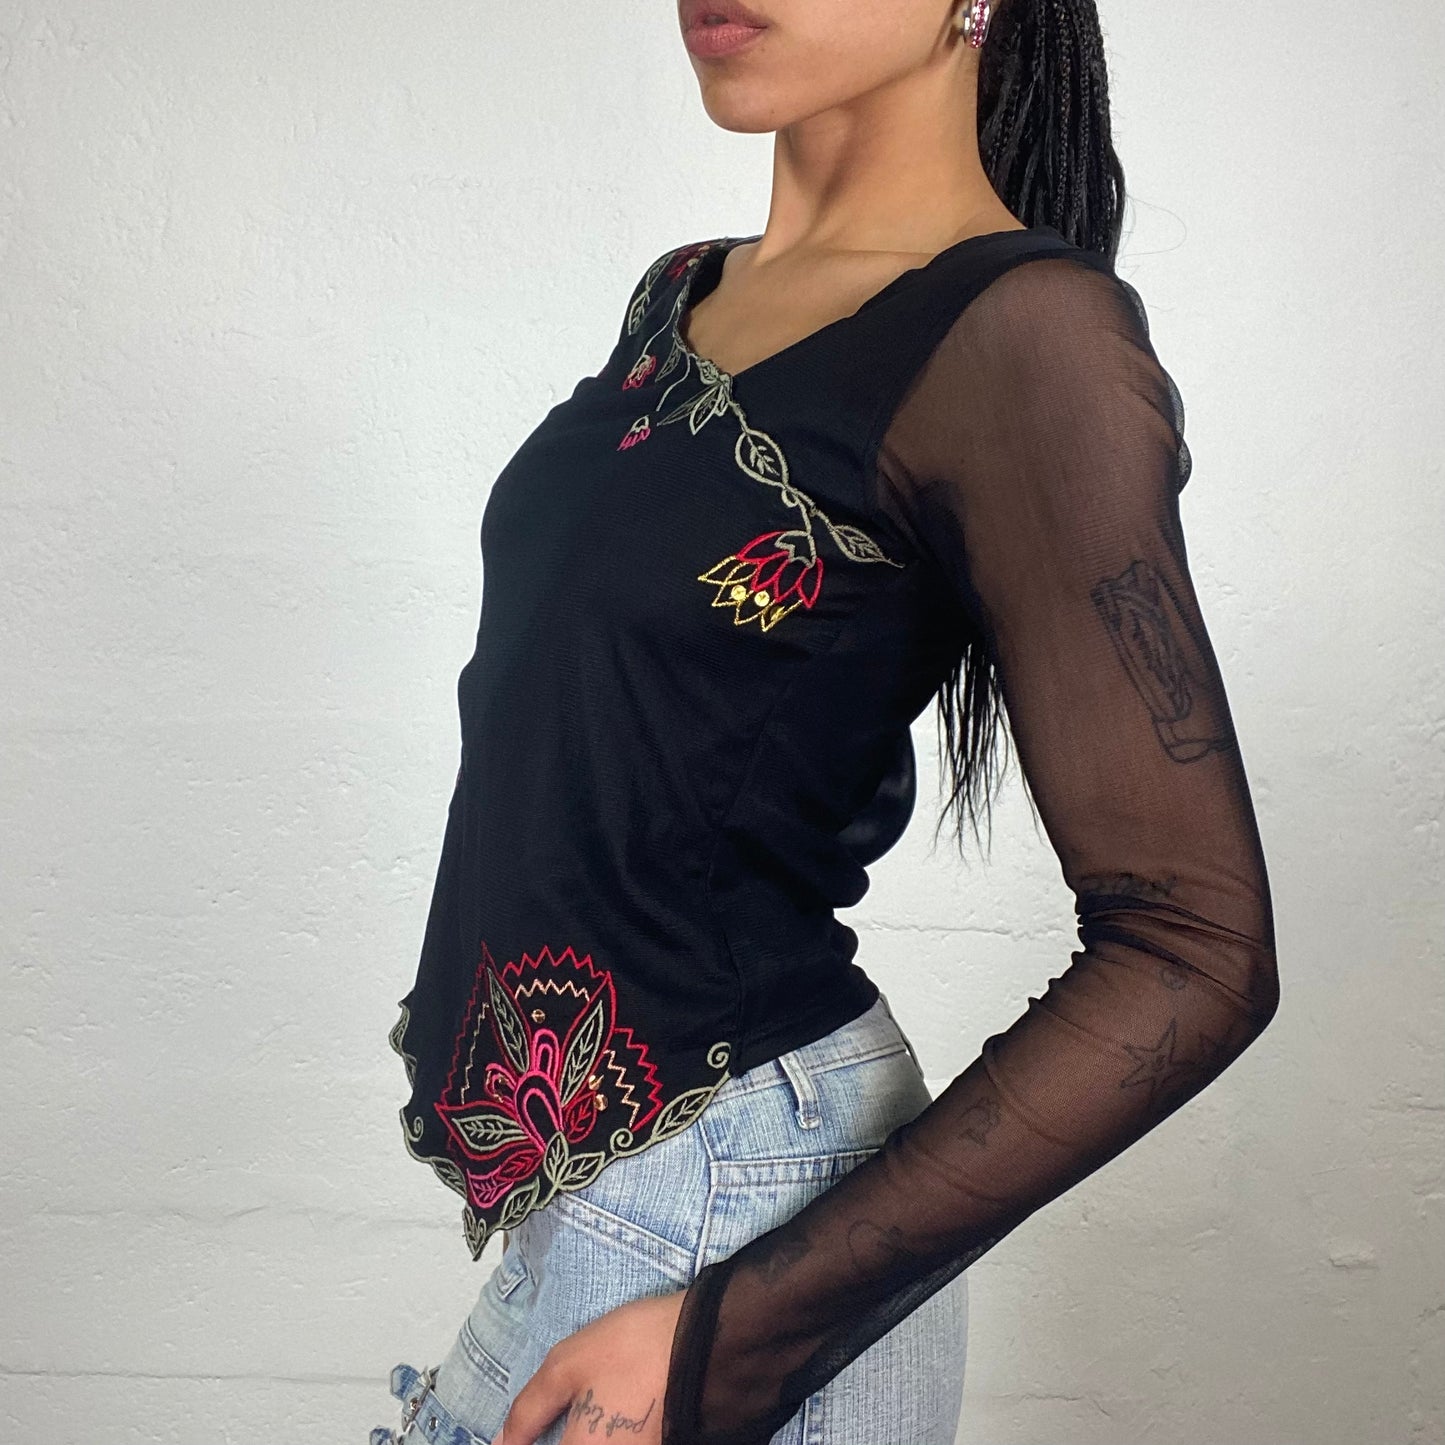 Vintage 2000’s Dark Boho Girl Black Mesh Long Sleeves Asymmetric Too with Floral Embroidery (S)